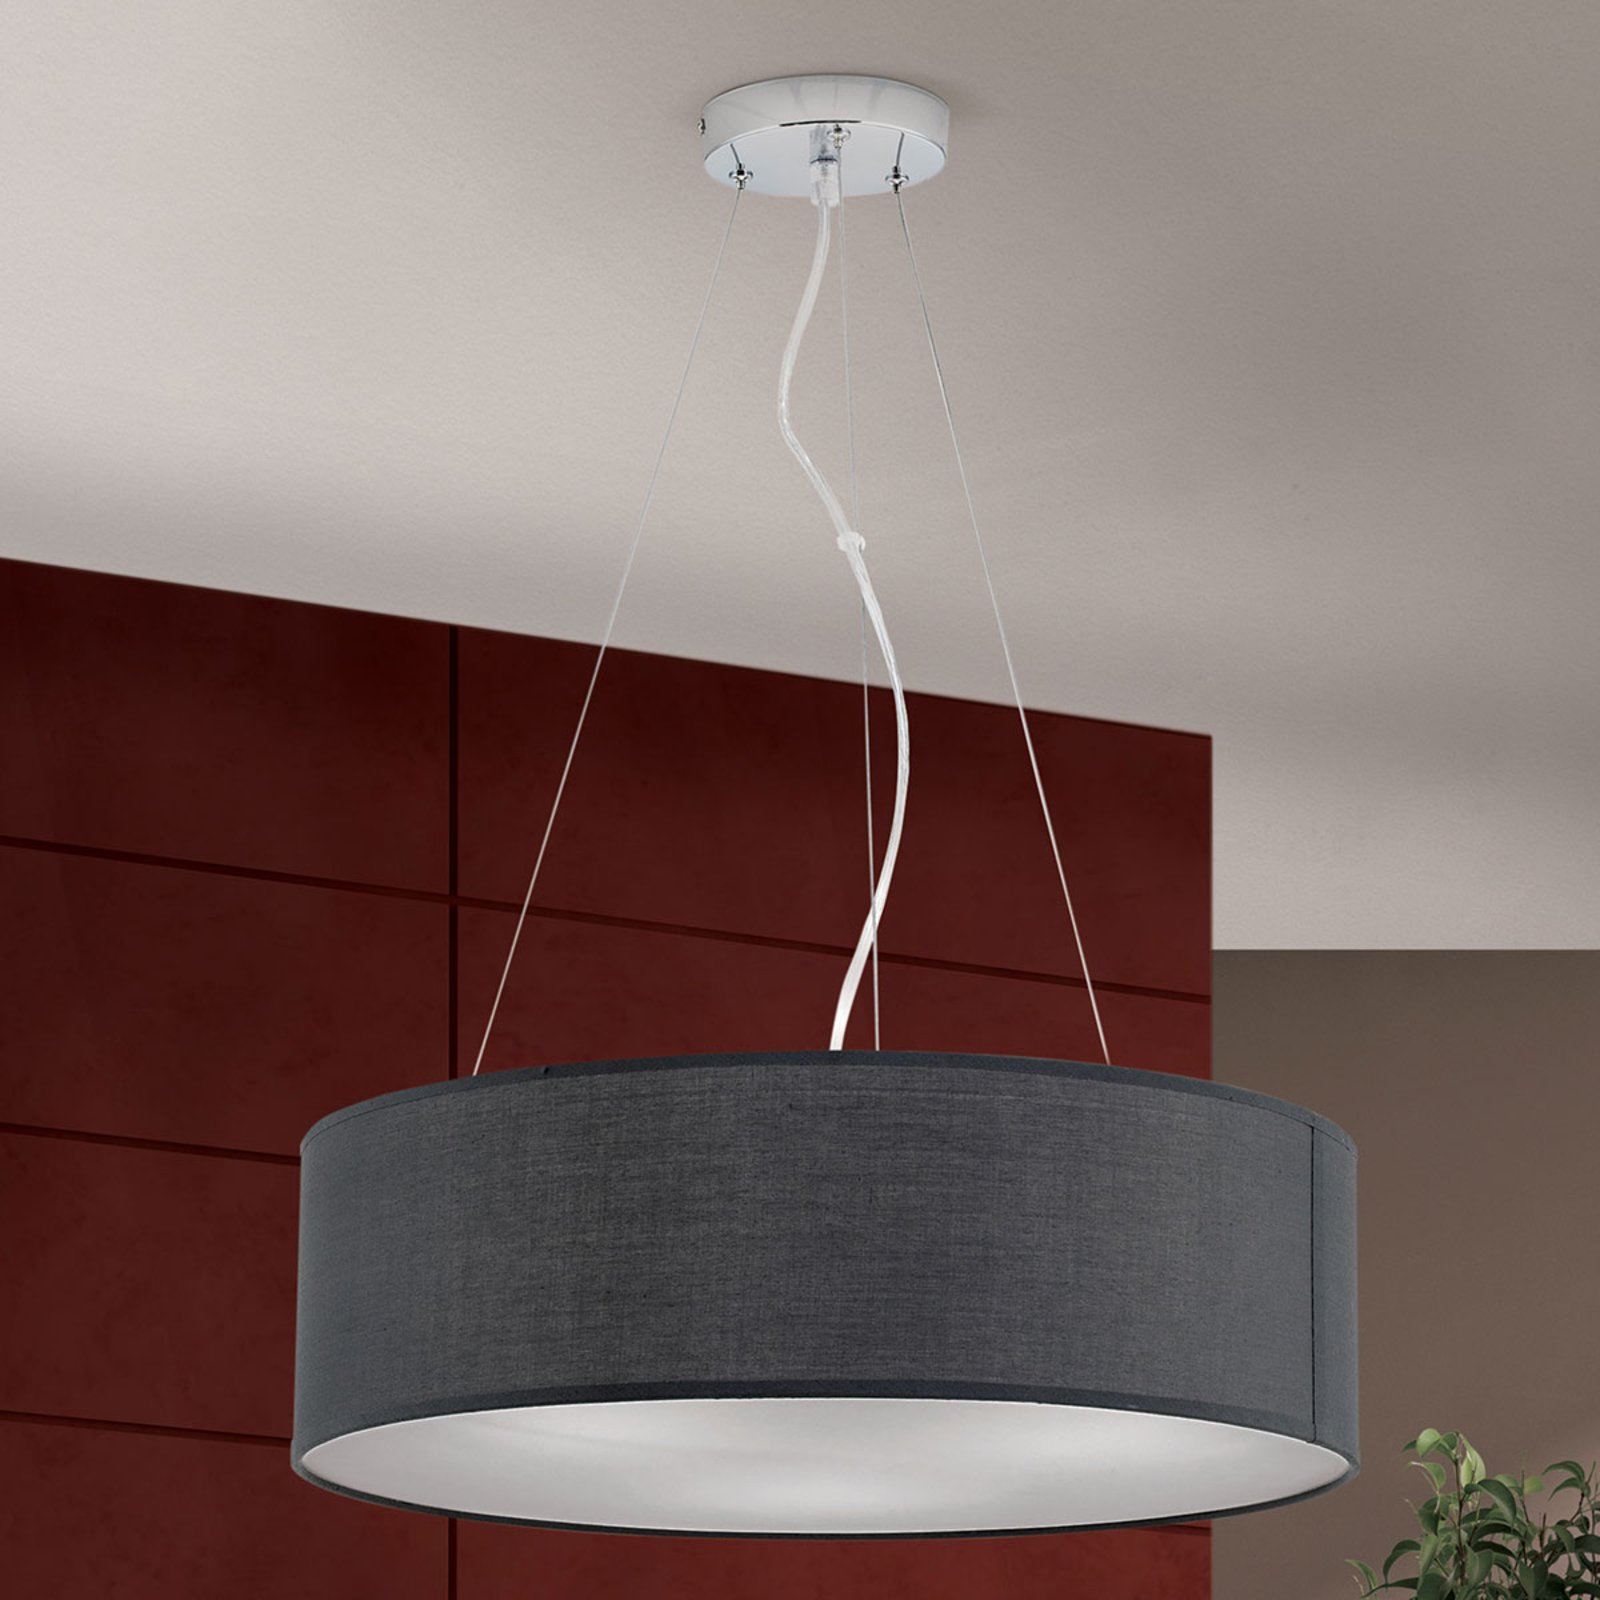 Ufo hanging light with a grey lampshade